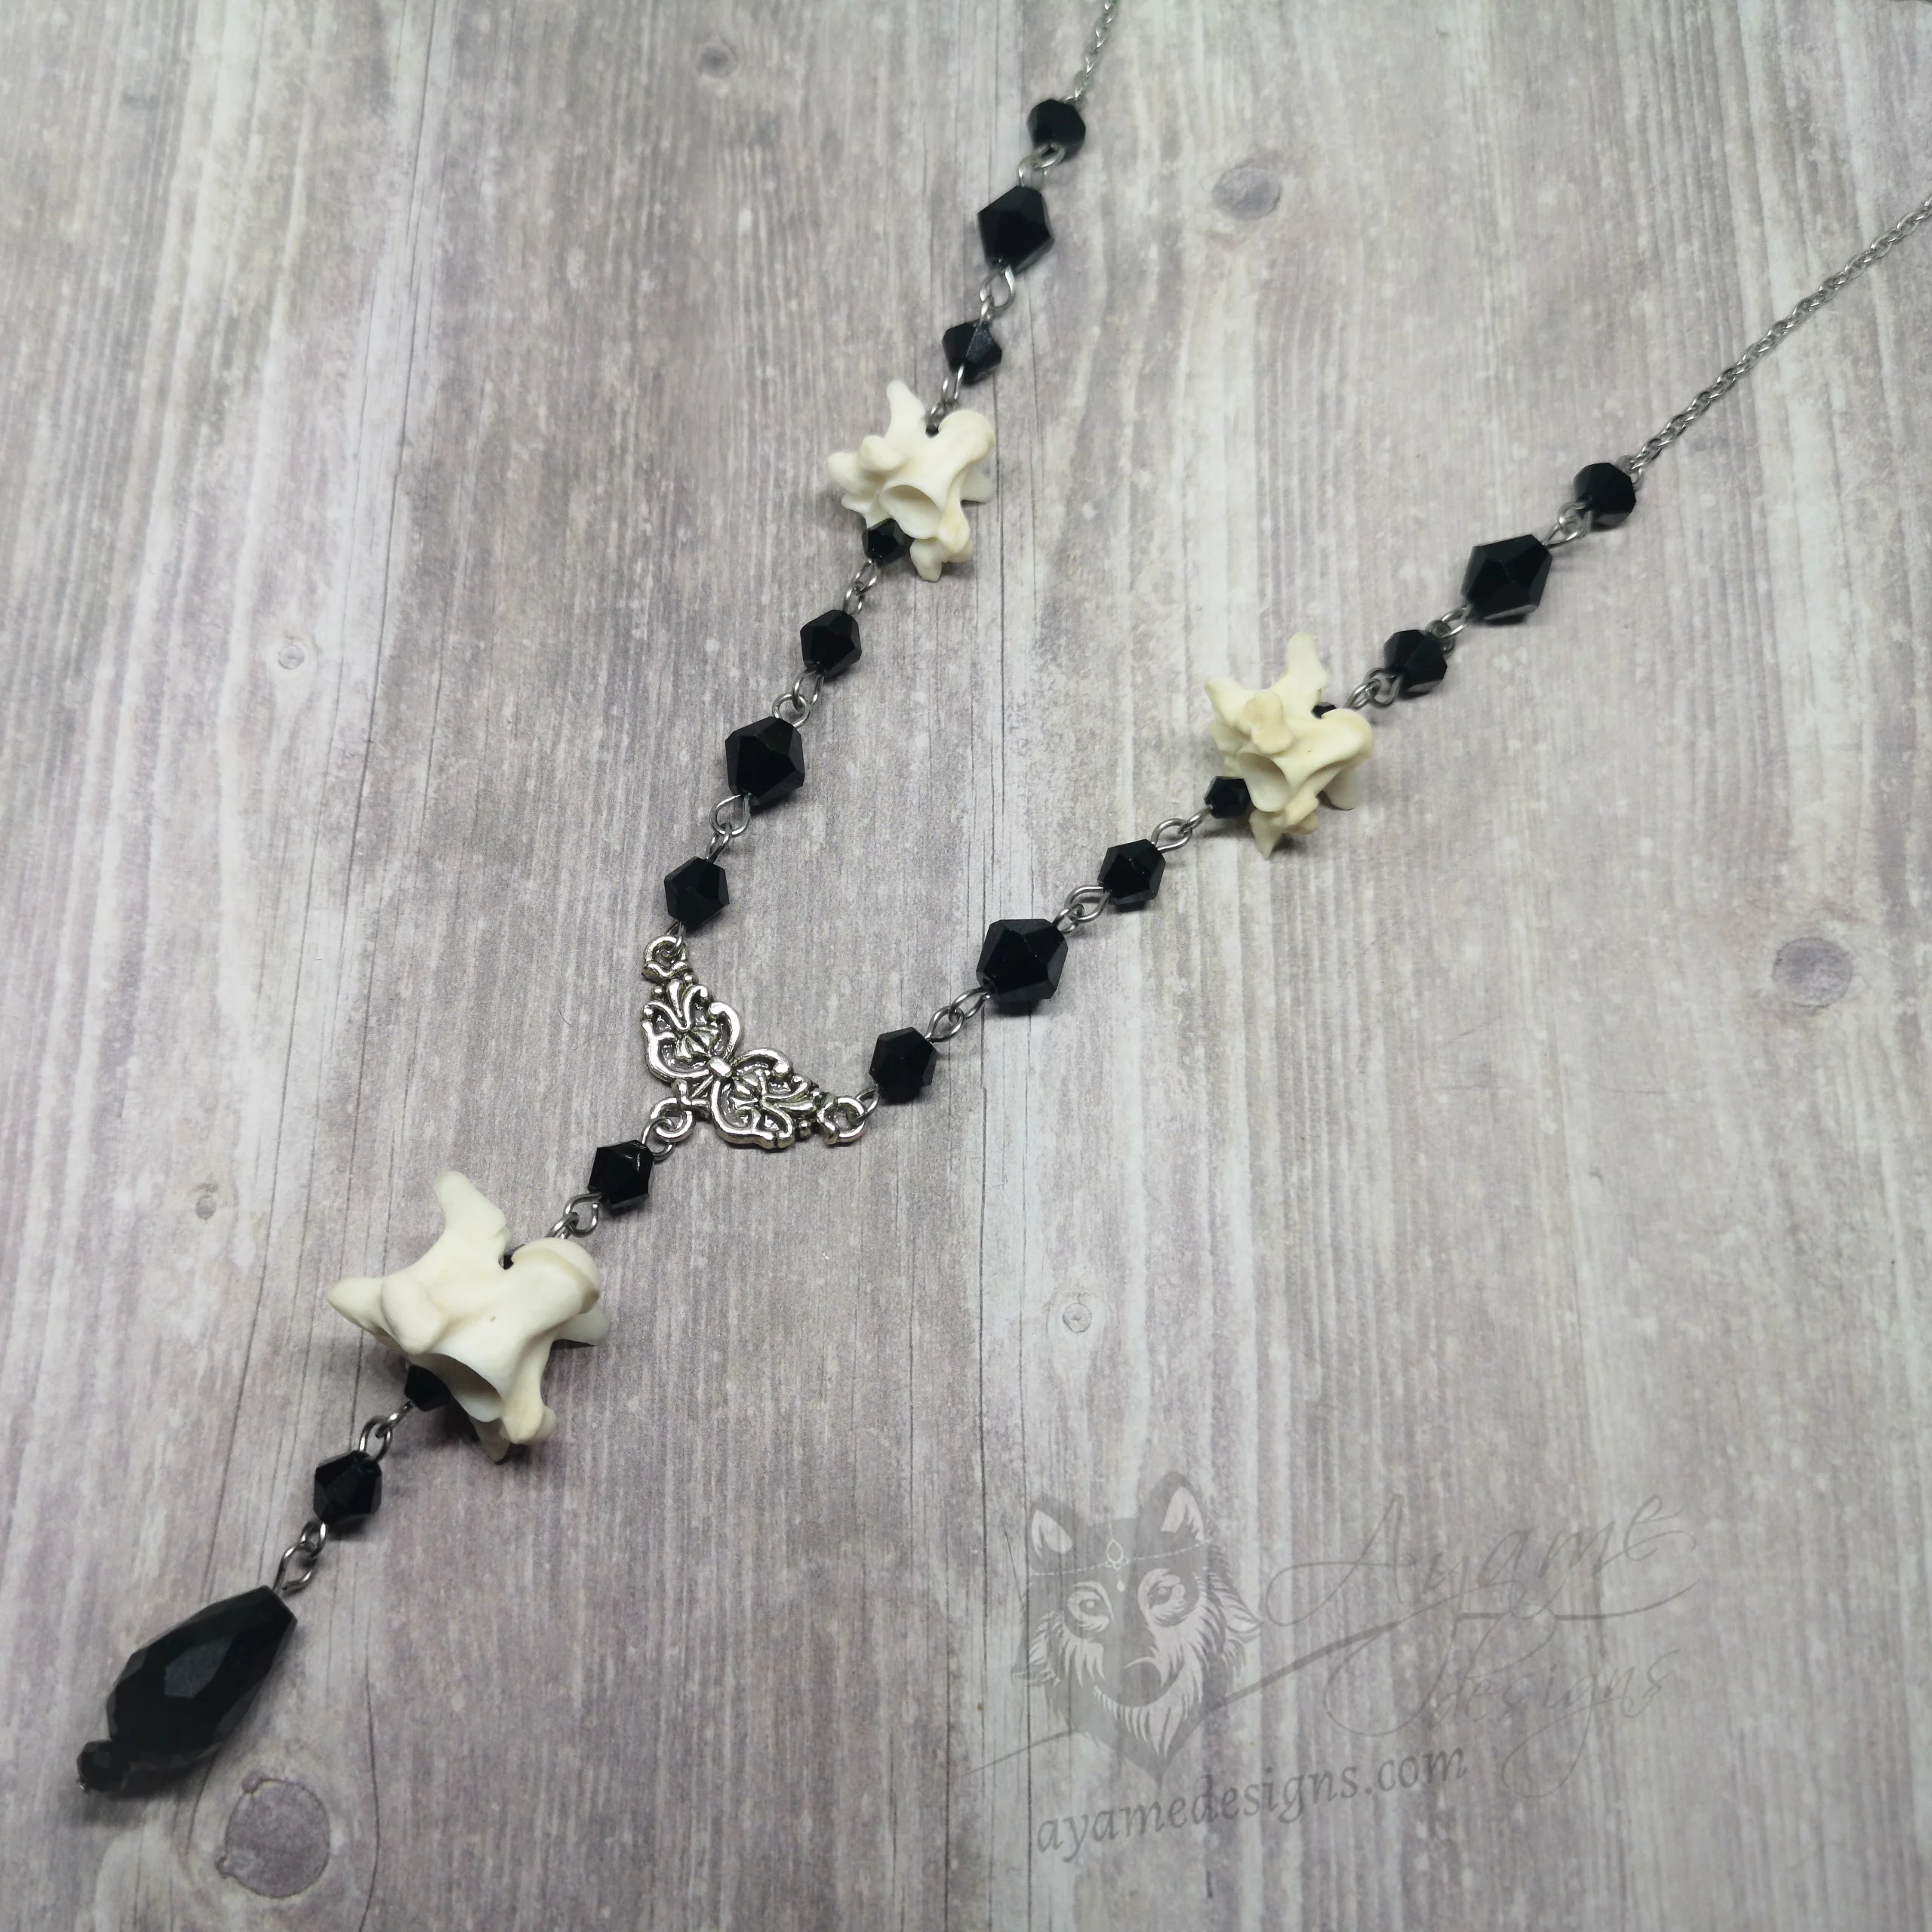 Handmade adjustable necklace with snake vertebrae, a filigree connector, black Austrian crystal beads, and stainless steel chain